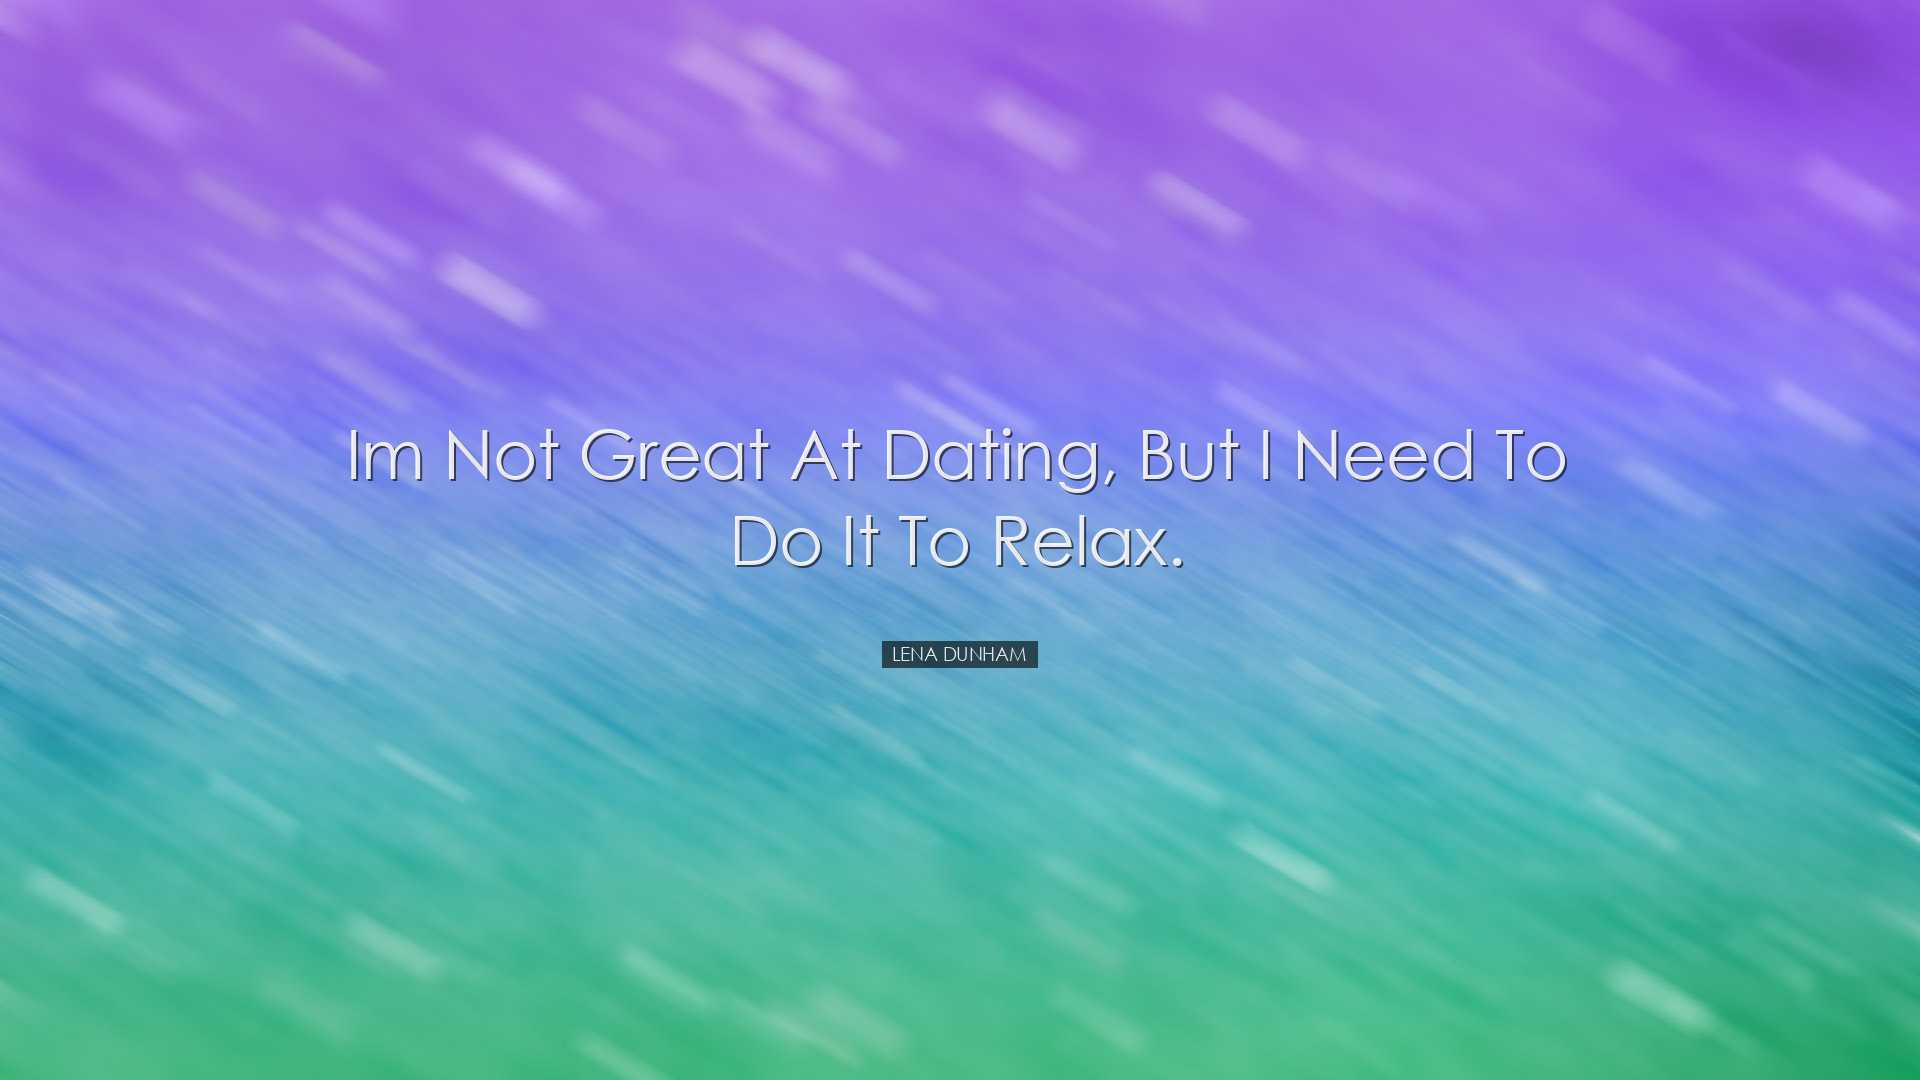 Im not great at dating, but I need to do it to relax. - Lena Dunha